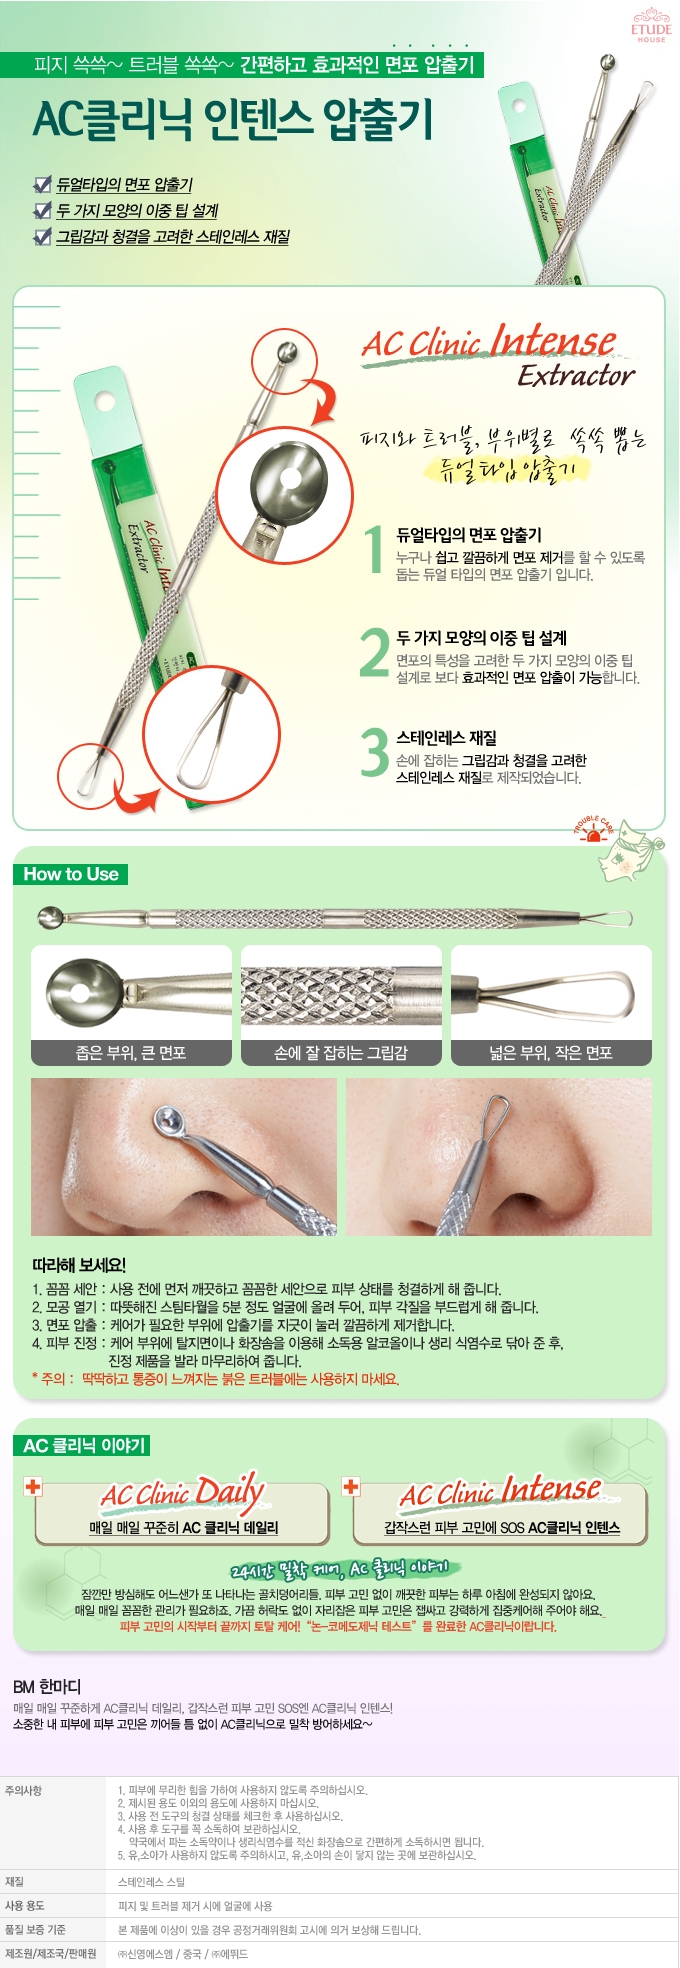 [ETUDE HOUSE] AC Clinic Intense Extractor